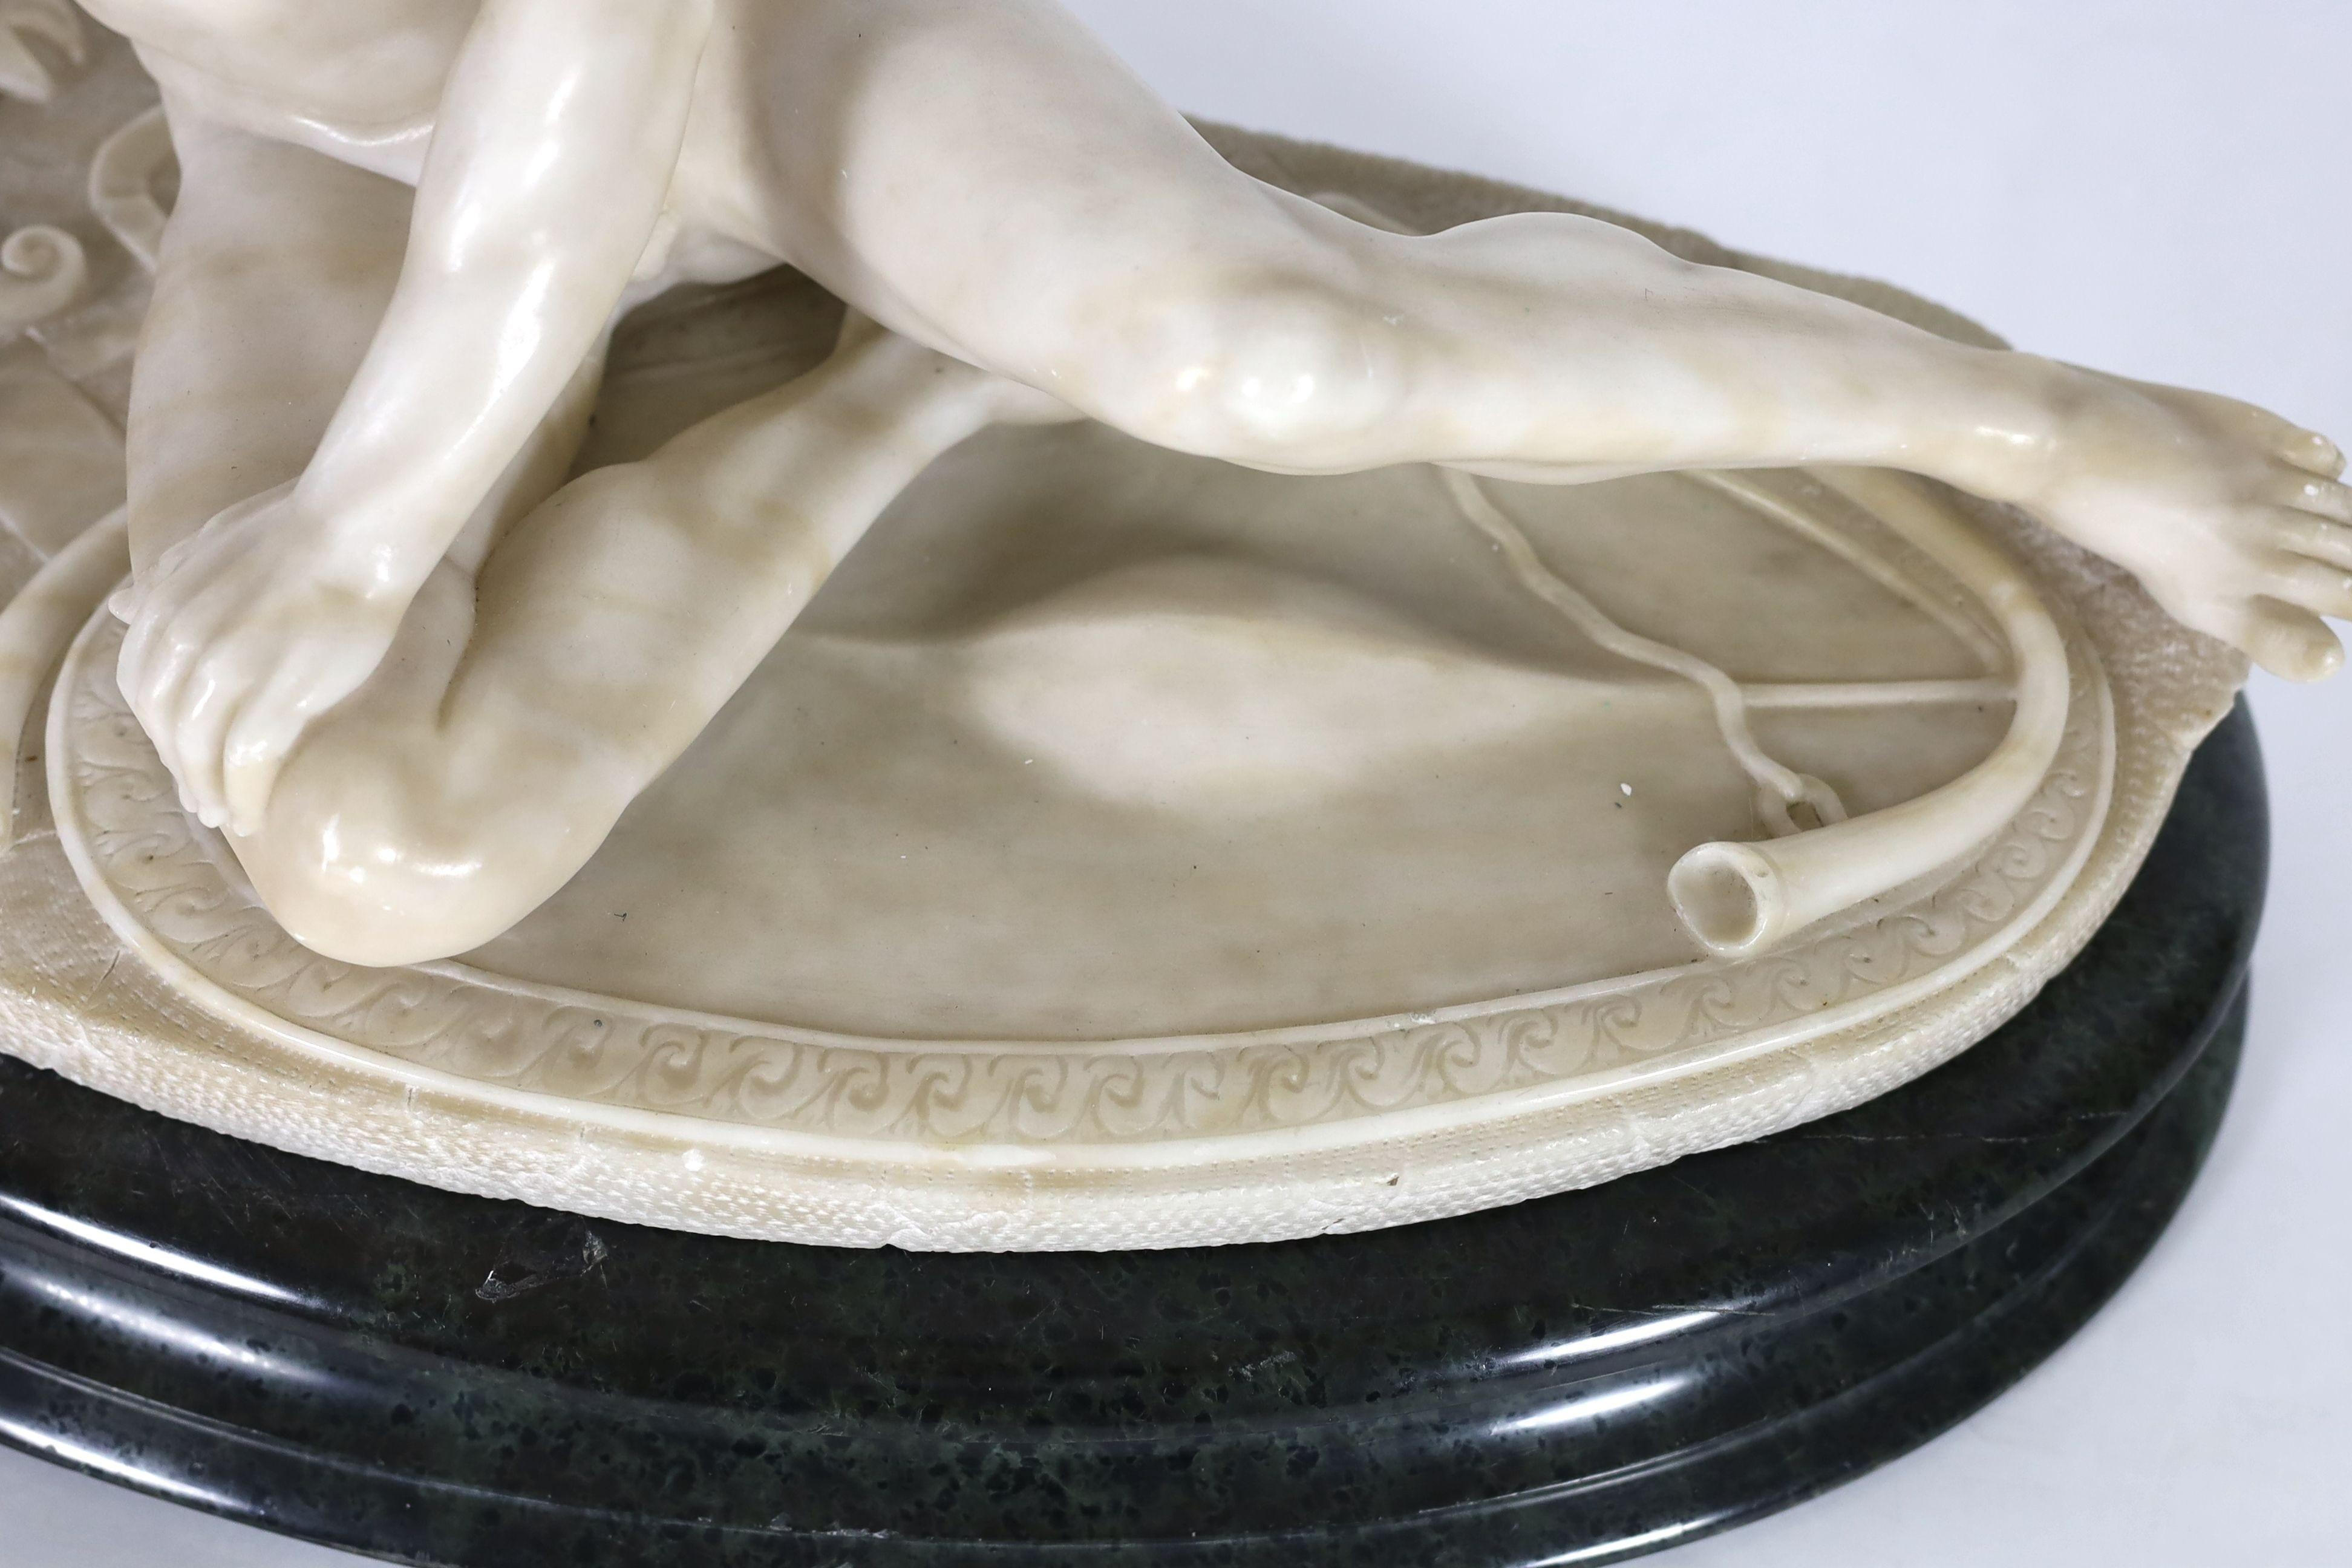 A late 19th century carved alabaster model of The Dying Gaul, width 65cm, height 43cm